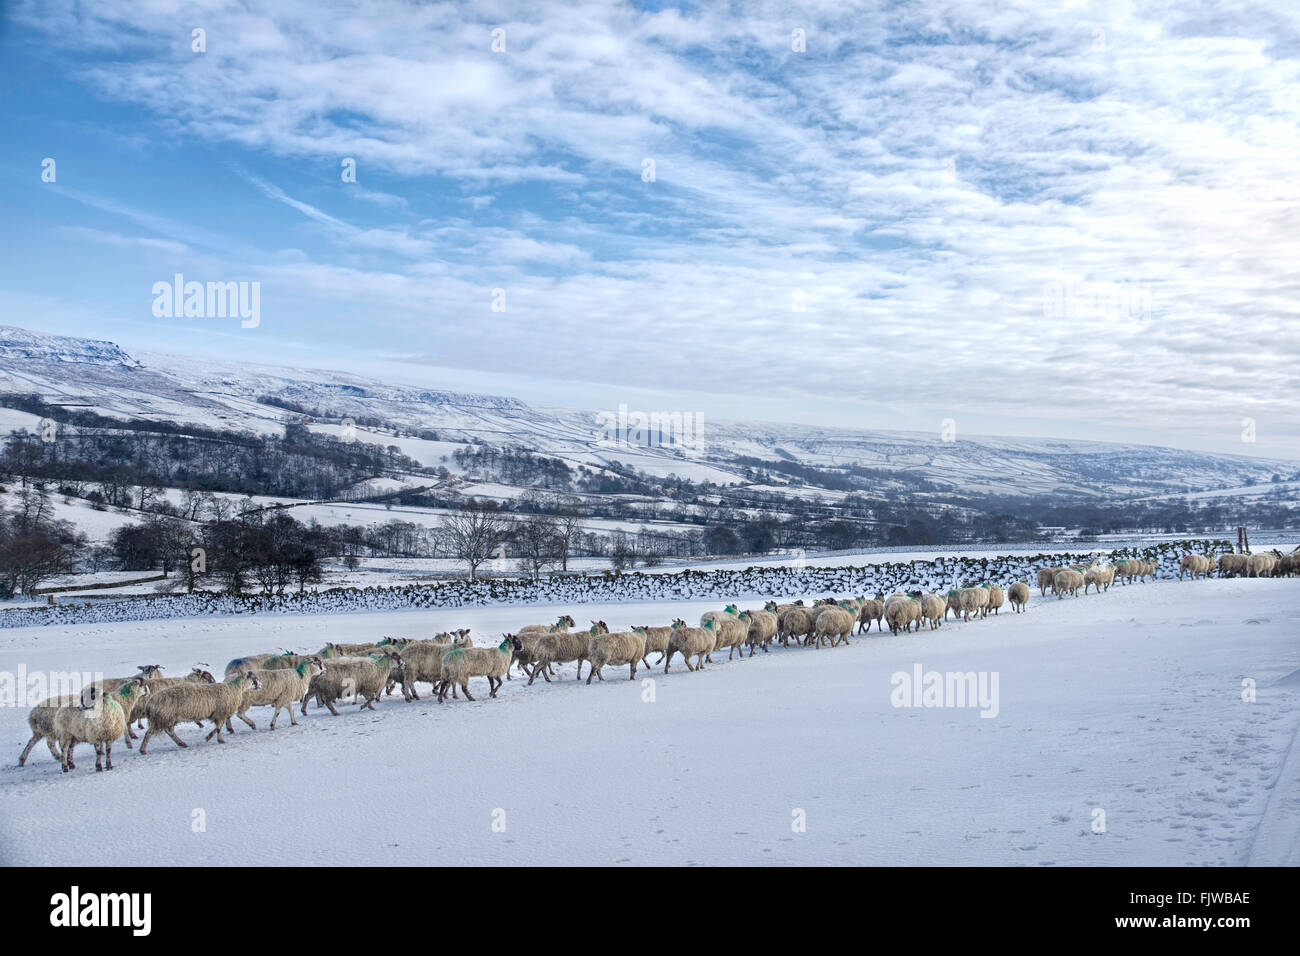 Sheep lining up for food in snowy Farndale. Stock Photo